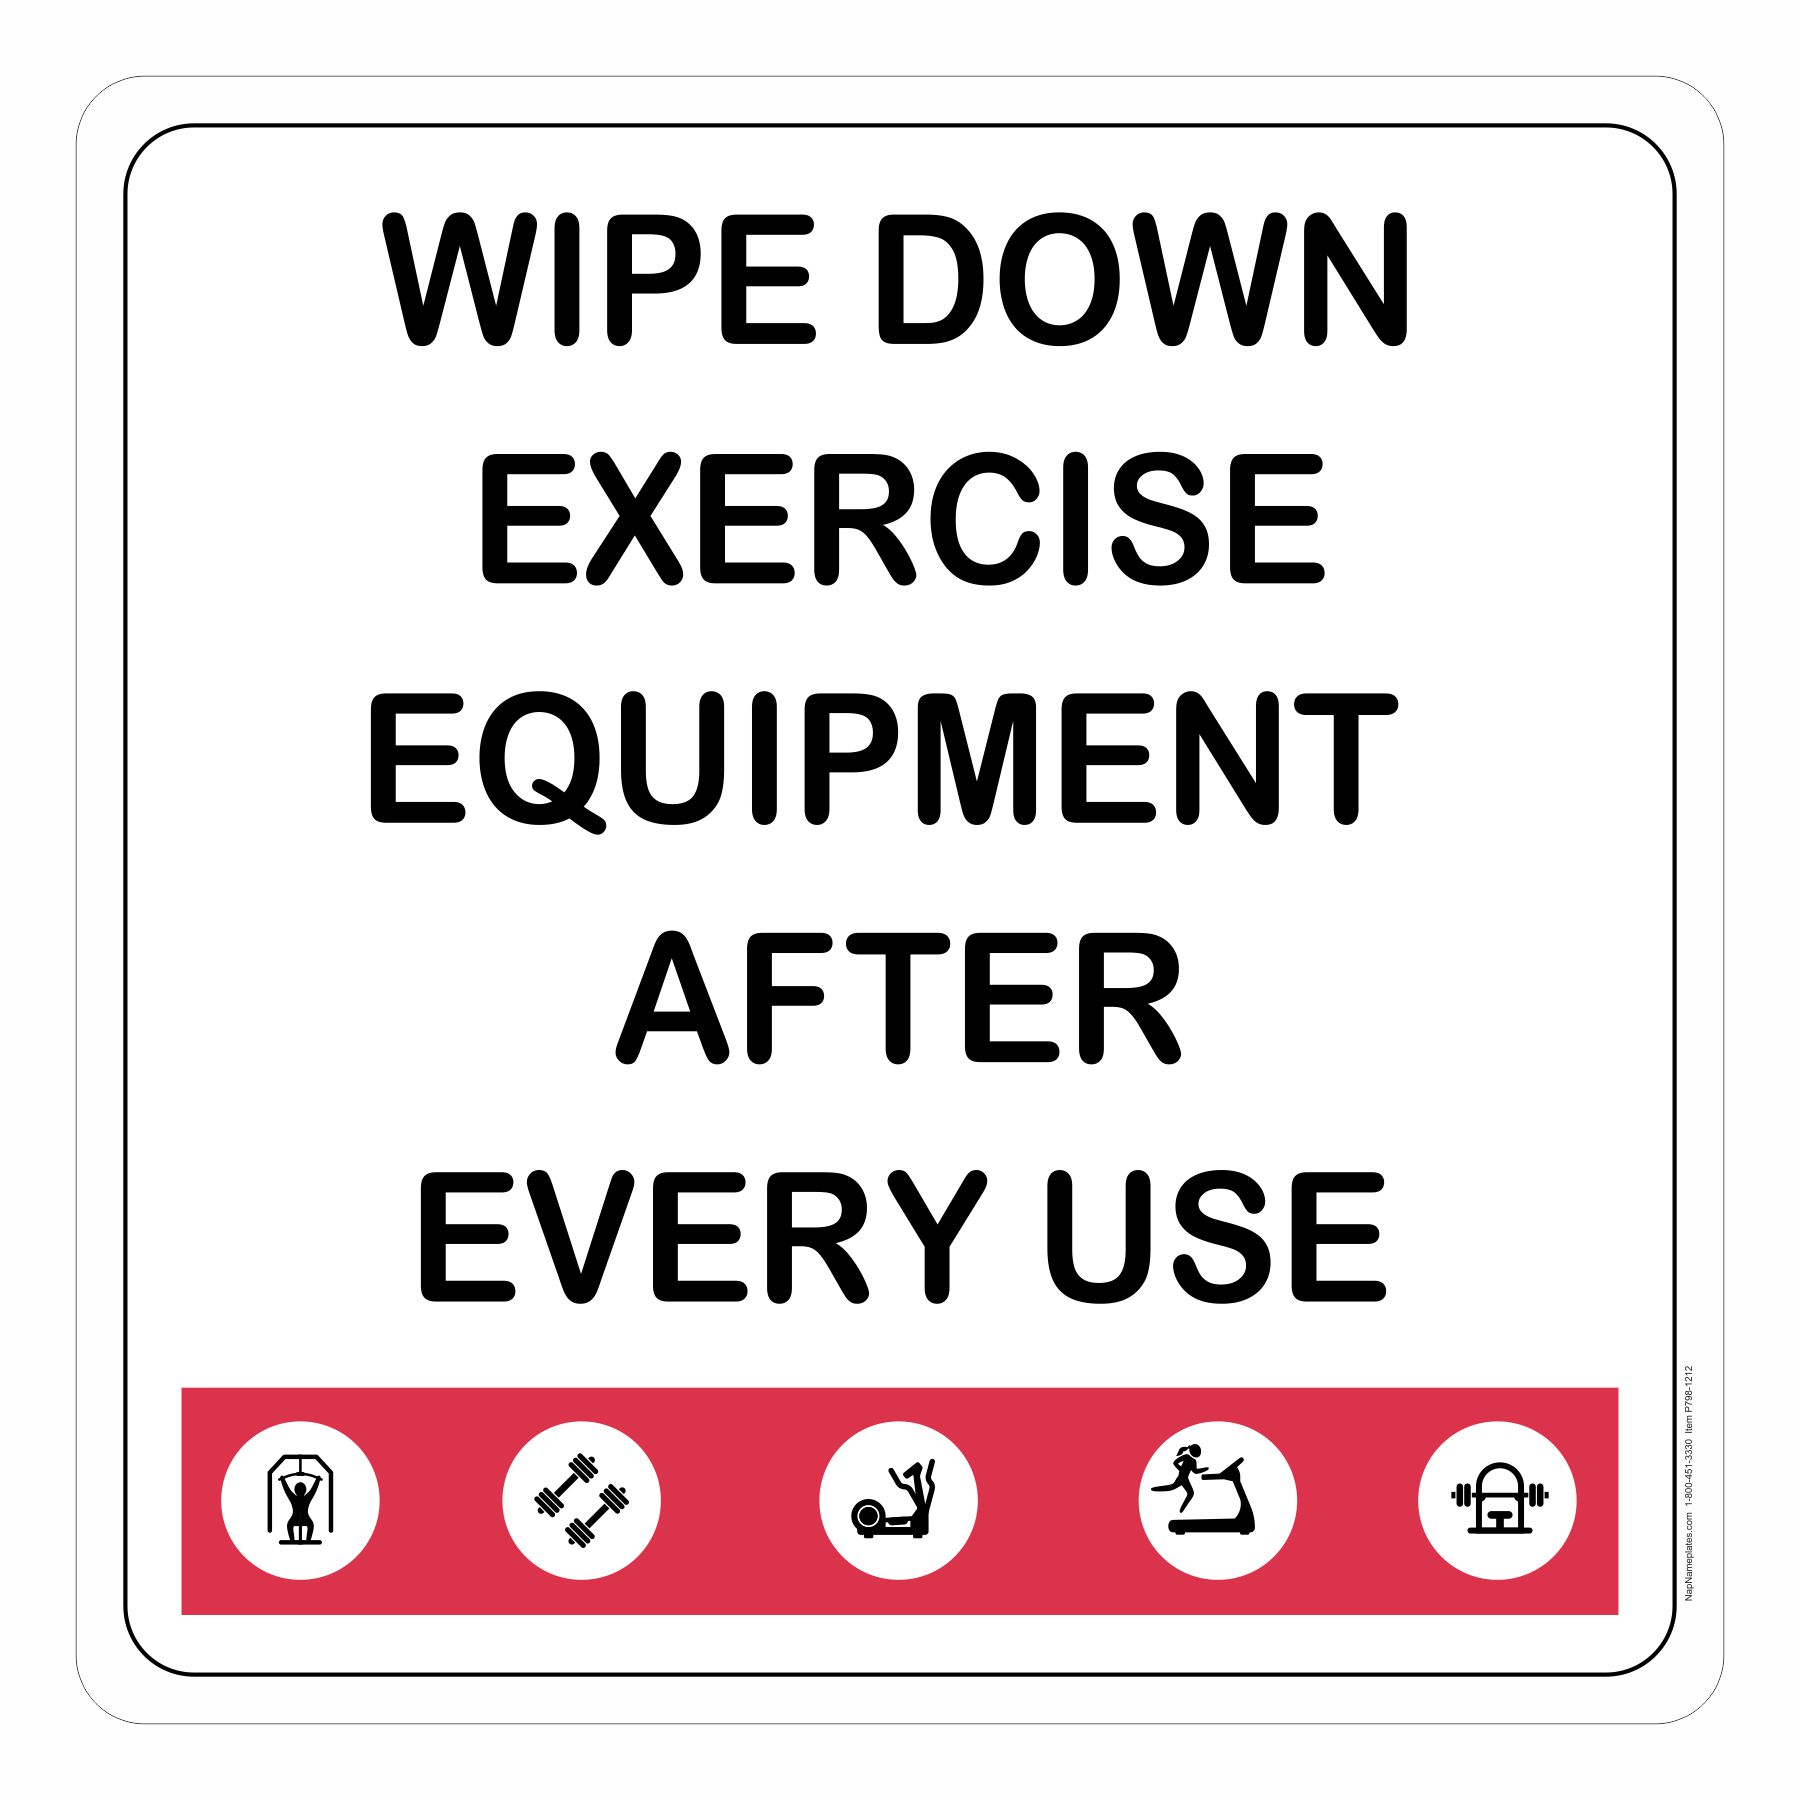 12x18 Please Wipe Down Equipment After Each Use Print Gym Picture Business Large Sign Aluminum Metal 4 Pack 